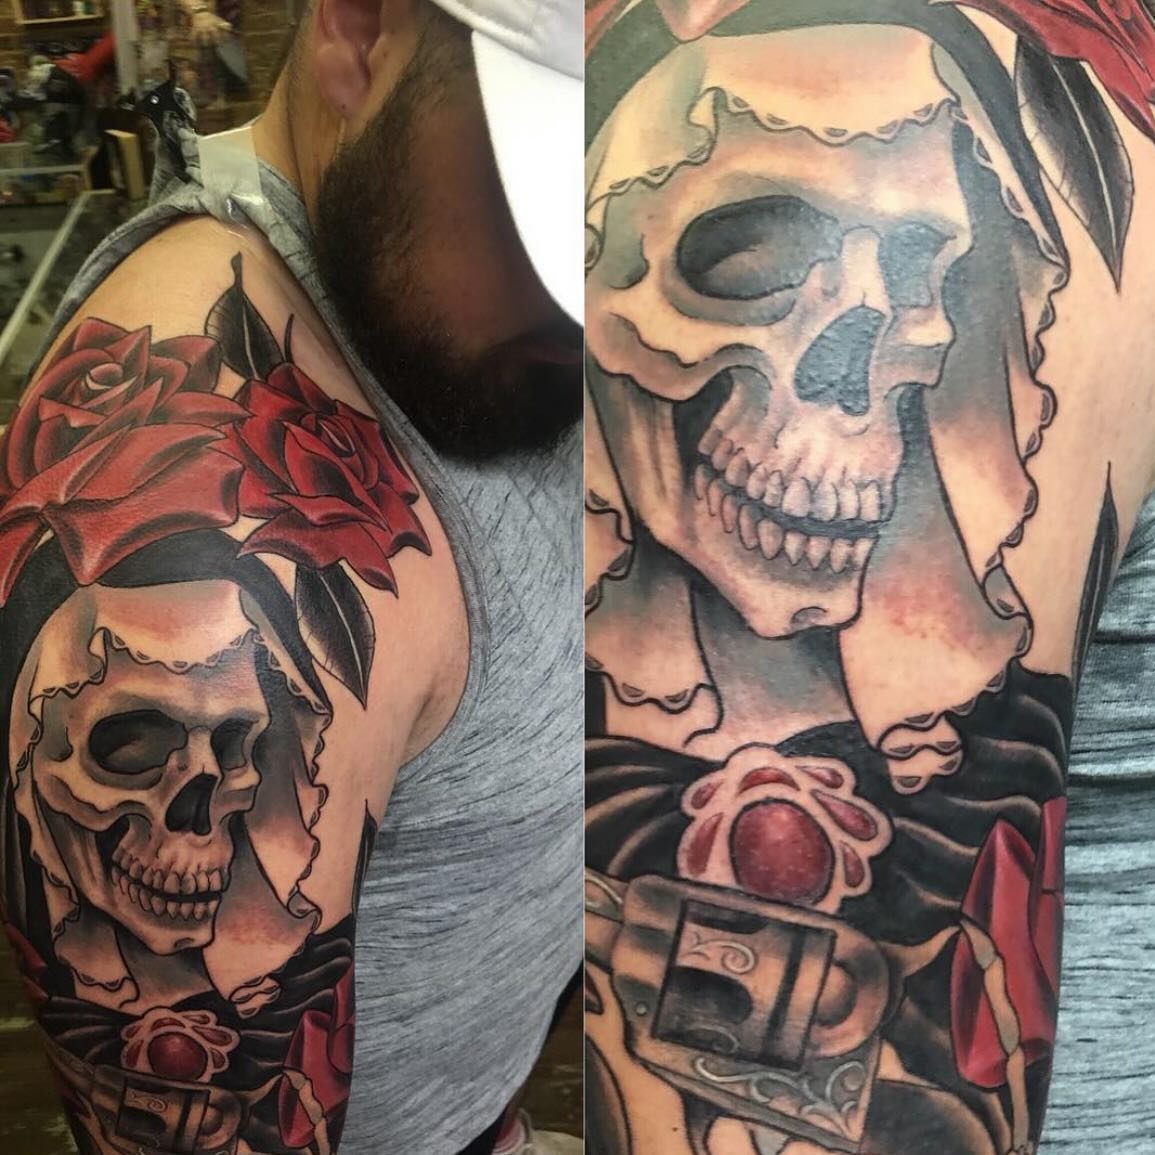 @purdyink with this super sick day of the dead shoulder piece 🔥
.
Give the shop a call to book with @purdyink 
.
720.904.8904
.
Using #dermshield #dynamiccolor #fkiron #eternalink #kwadron #solidstatesupplies